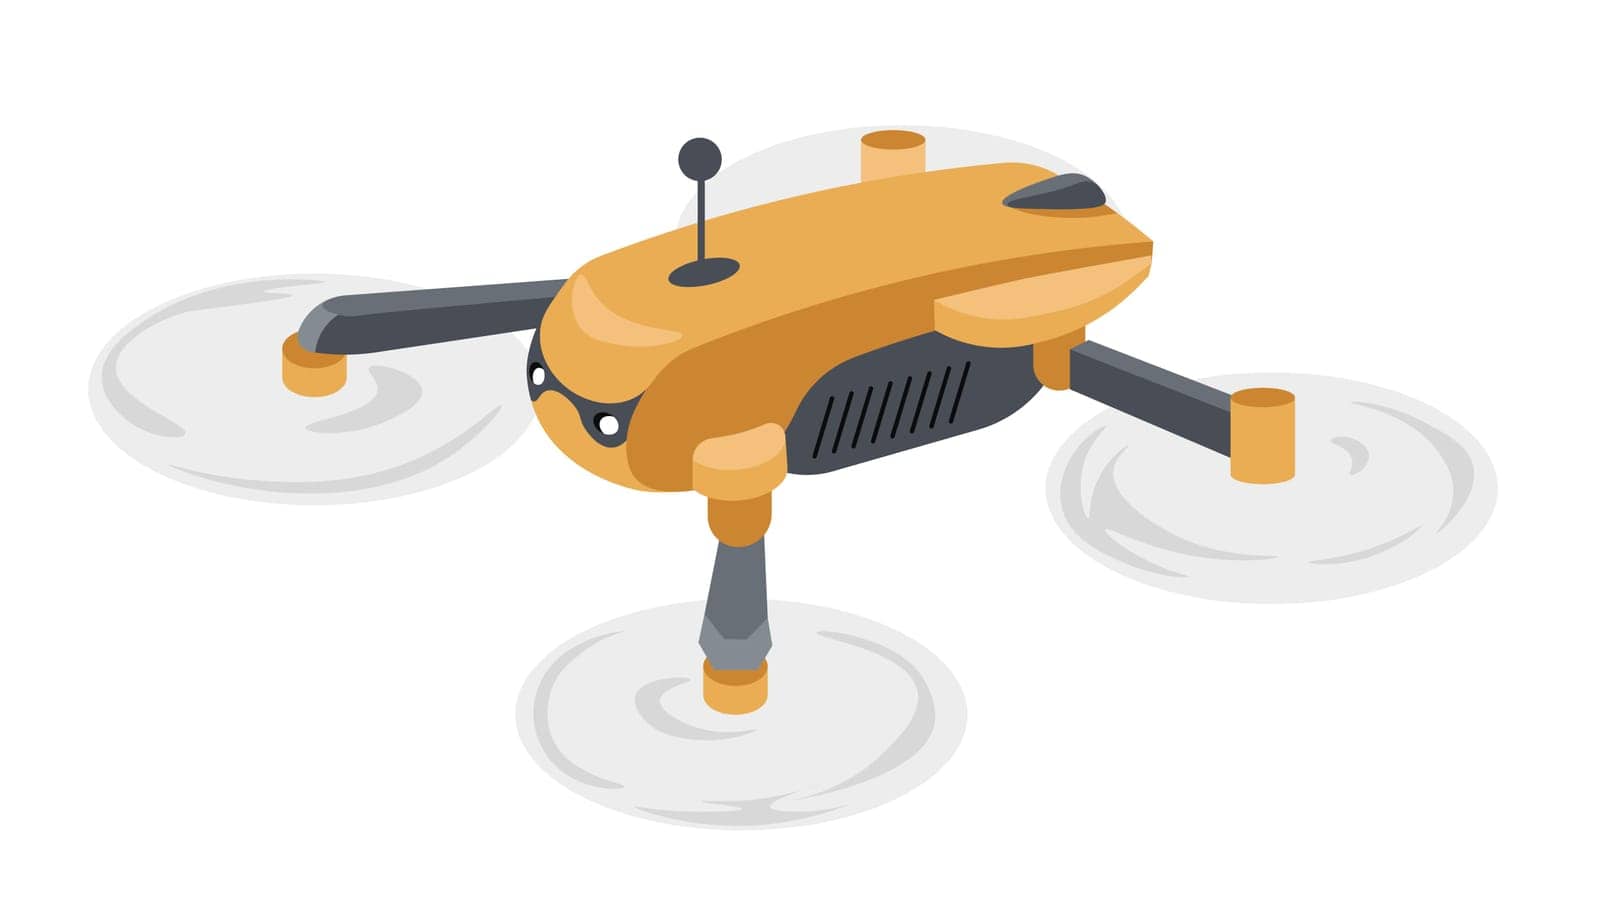 Gadgets and modern technologies, isolated drone or unmanned aerial vehicle with controller. Controlling small aircraft, surveillance system or filming, taking photos and video. Vector in flat style